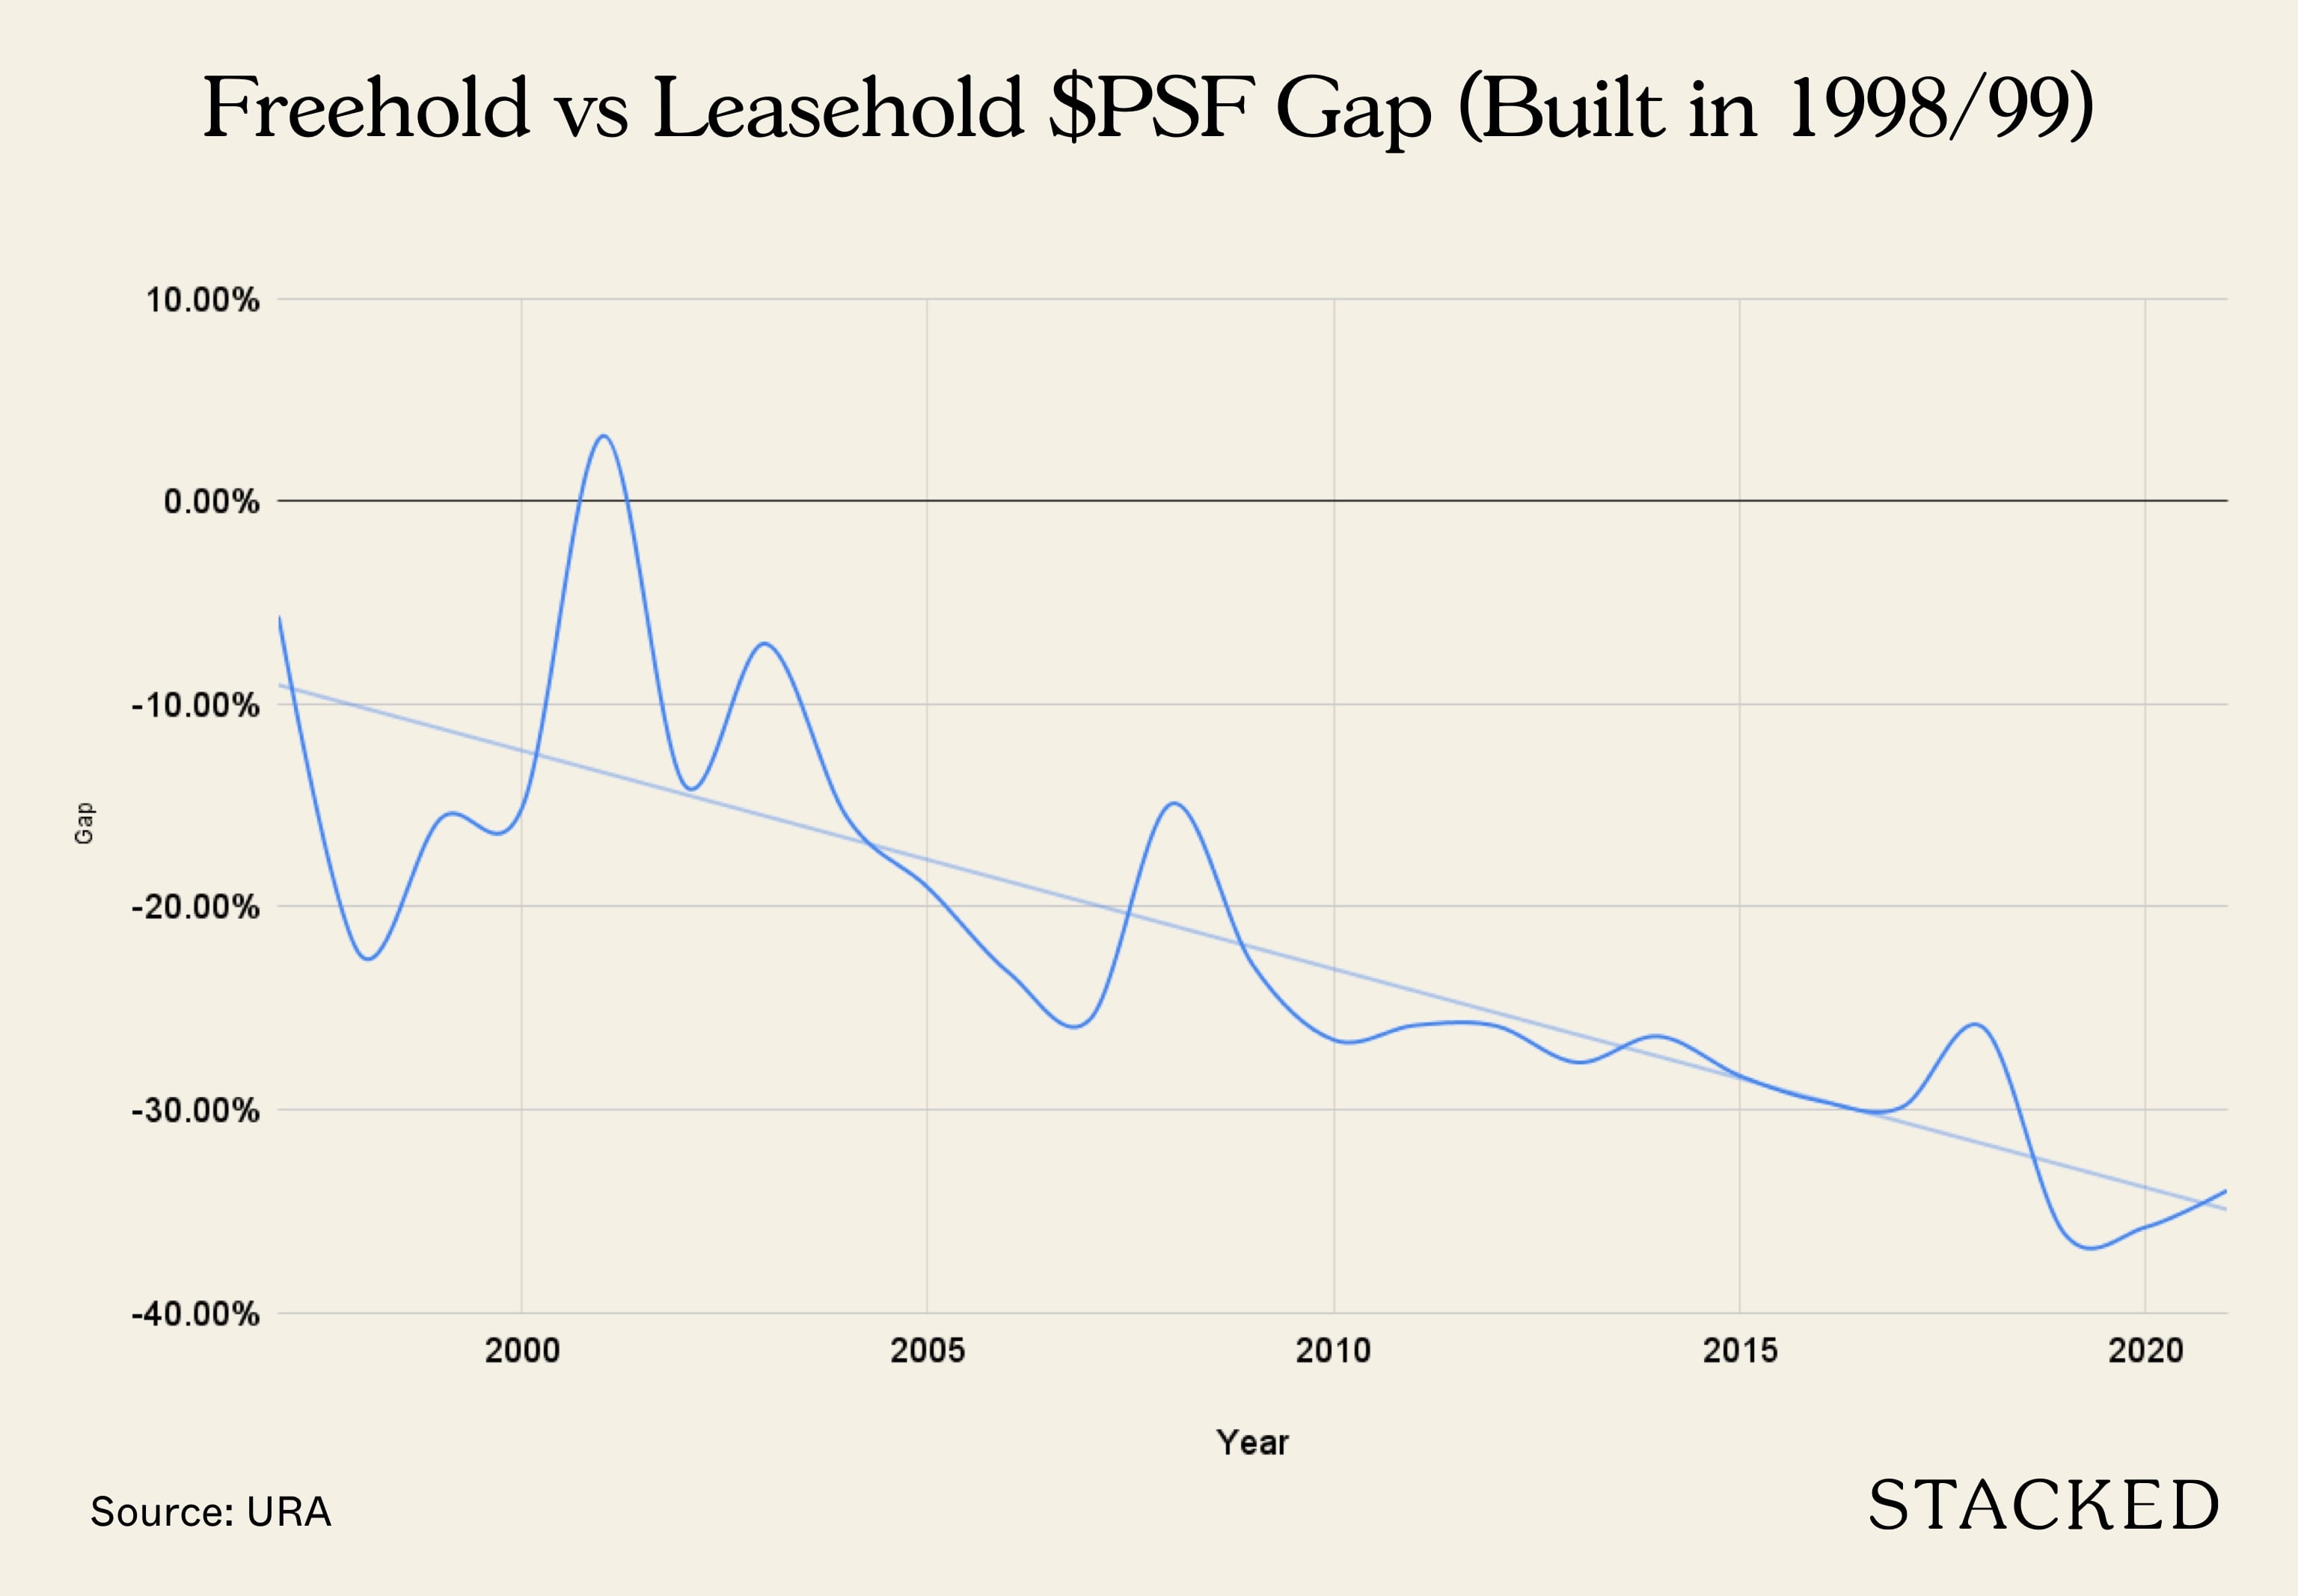 Freehold Leasehold PSF Gap